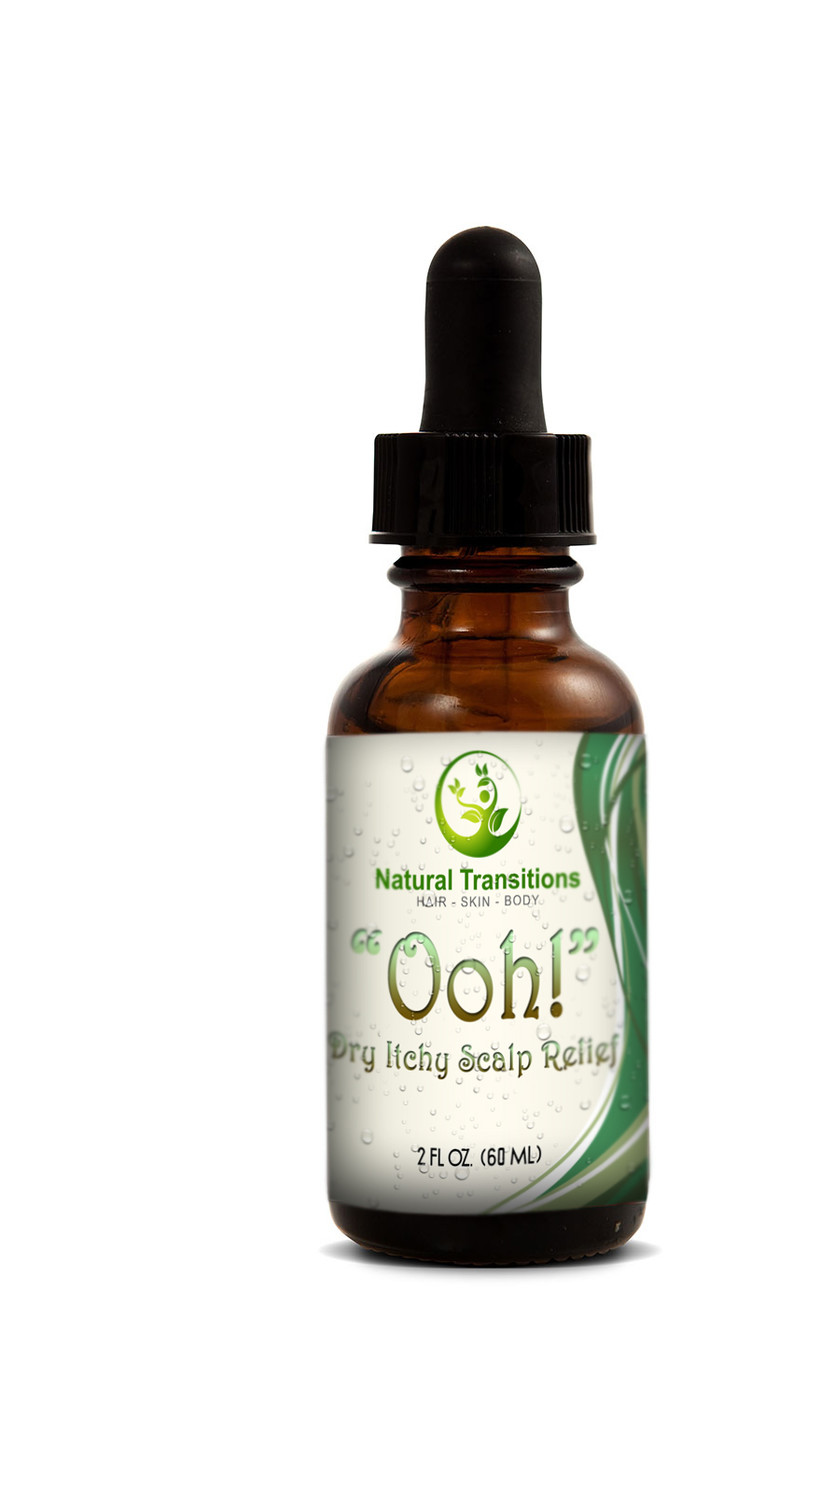 “Ooh!" Dry Itchy Scalp Relief